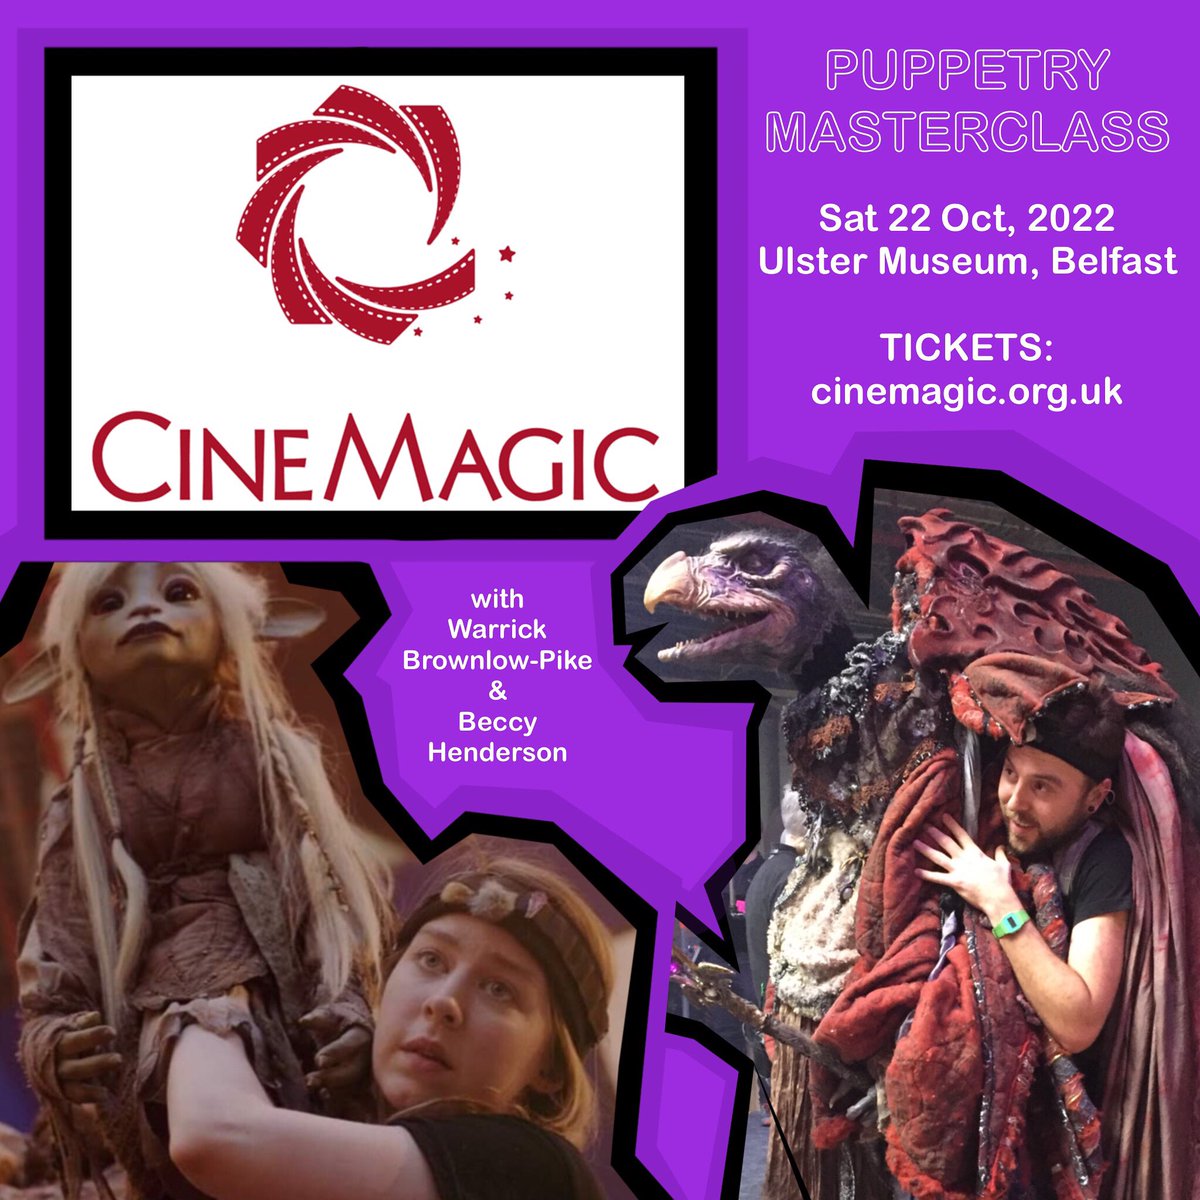 Beccy Henderson and I are holding a Puppetry Masterclass at @UlsterMuseum this Saturday with @Cinemagic! Check in to see if there are still any last minute tickets available! @YoungsterBeccy #Cinemagic #CinemagicFilmFestival #puppet #puppets #puppetry #puppeteer